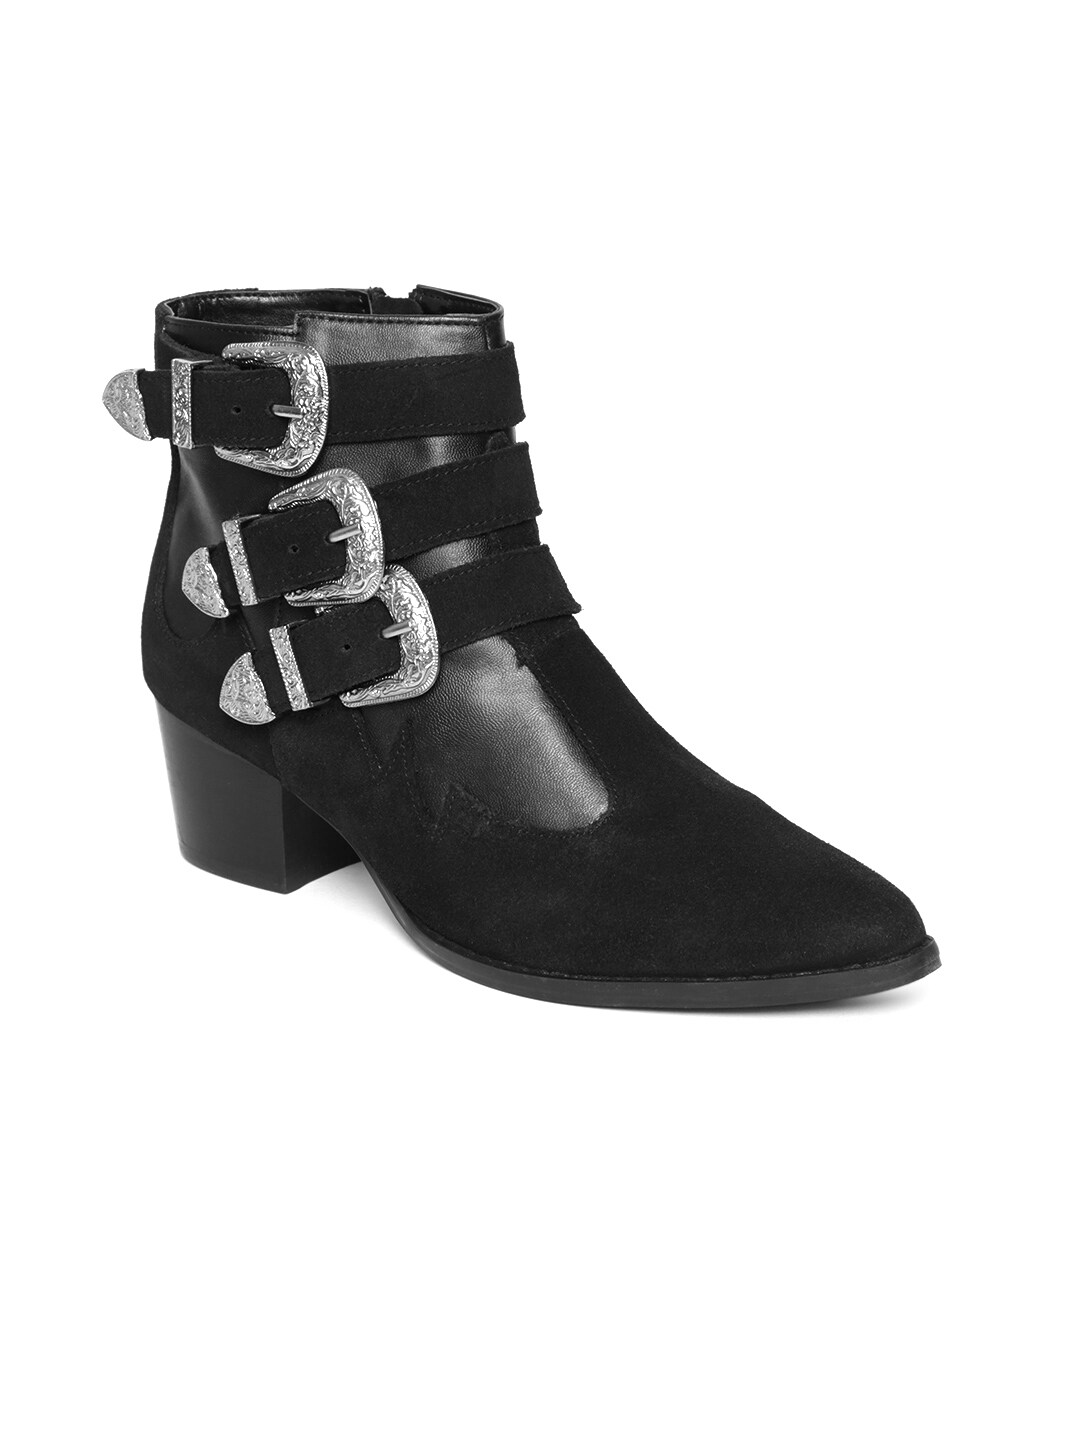 Carlton London Women Black Leather Heeled Boots Price in India